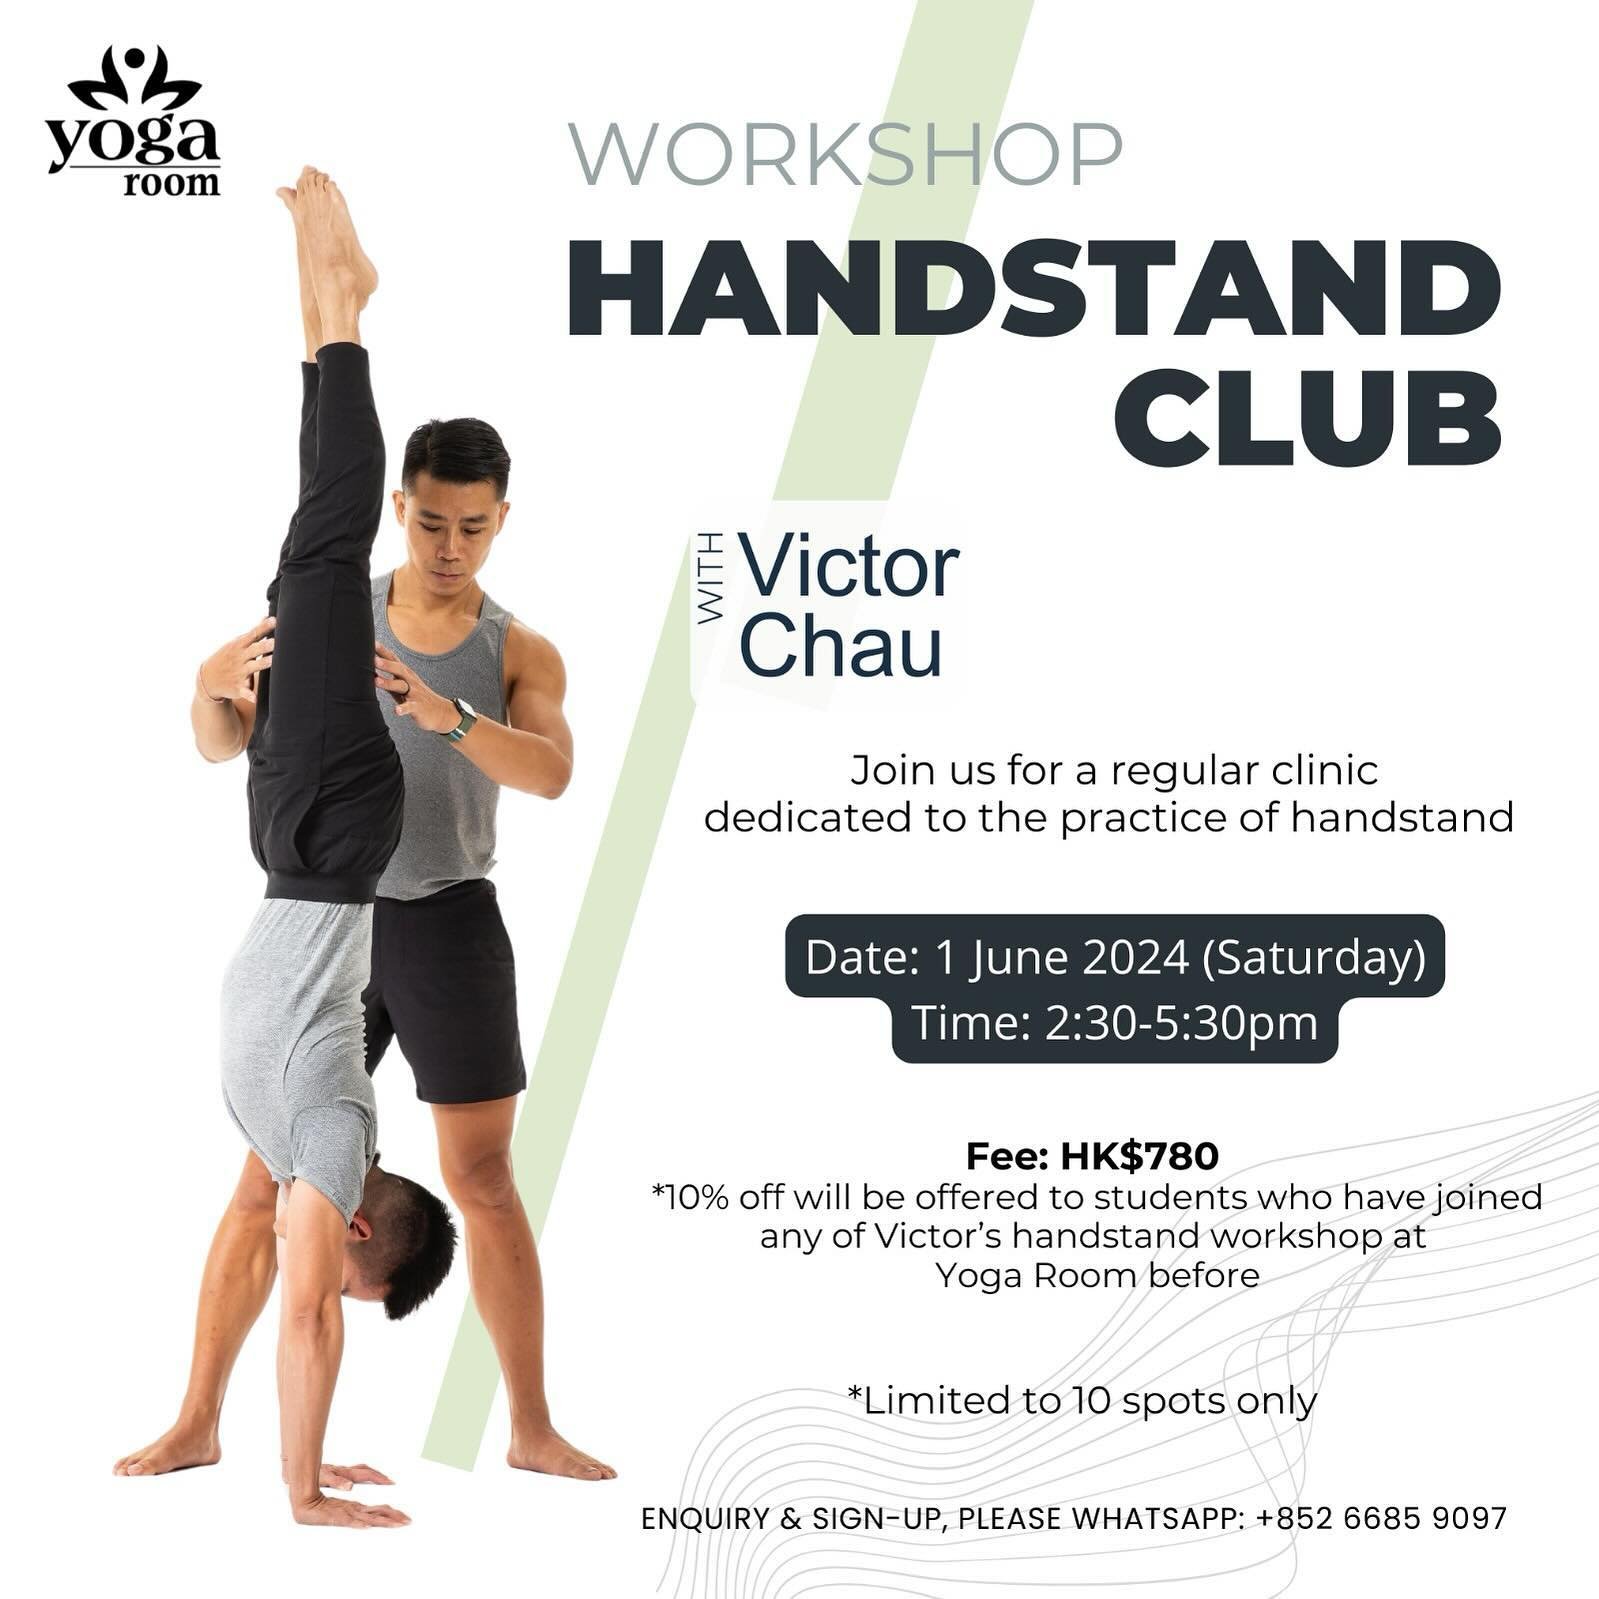 NEXT ROUND in June✨🤸🏻&zwj;♂️ The Handstand Club with Victor Chau @victorchauyoga 

Join us for a regular clinic dedicated to the practice of handstand.

⚪️ Date: 1 June 2024 (Saturday)
⚪️ Time: 2:30-5:30pm (3 hours)
⚪️ Venue: 4/F, The Yoga Room
⚪️ 